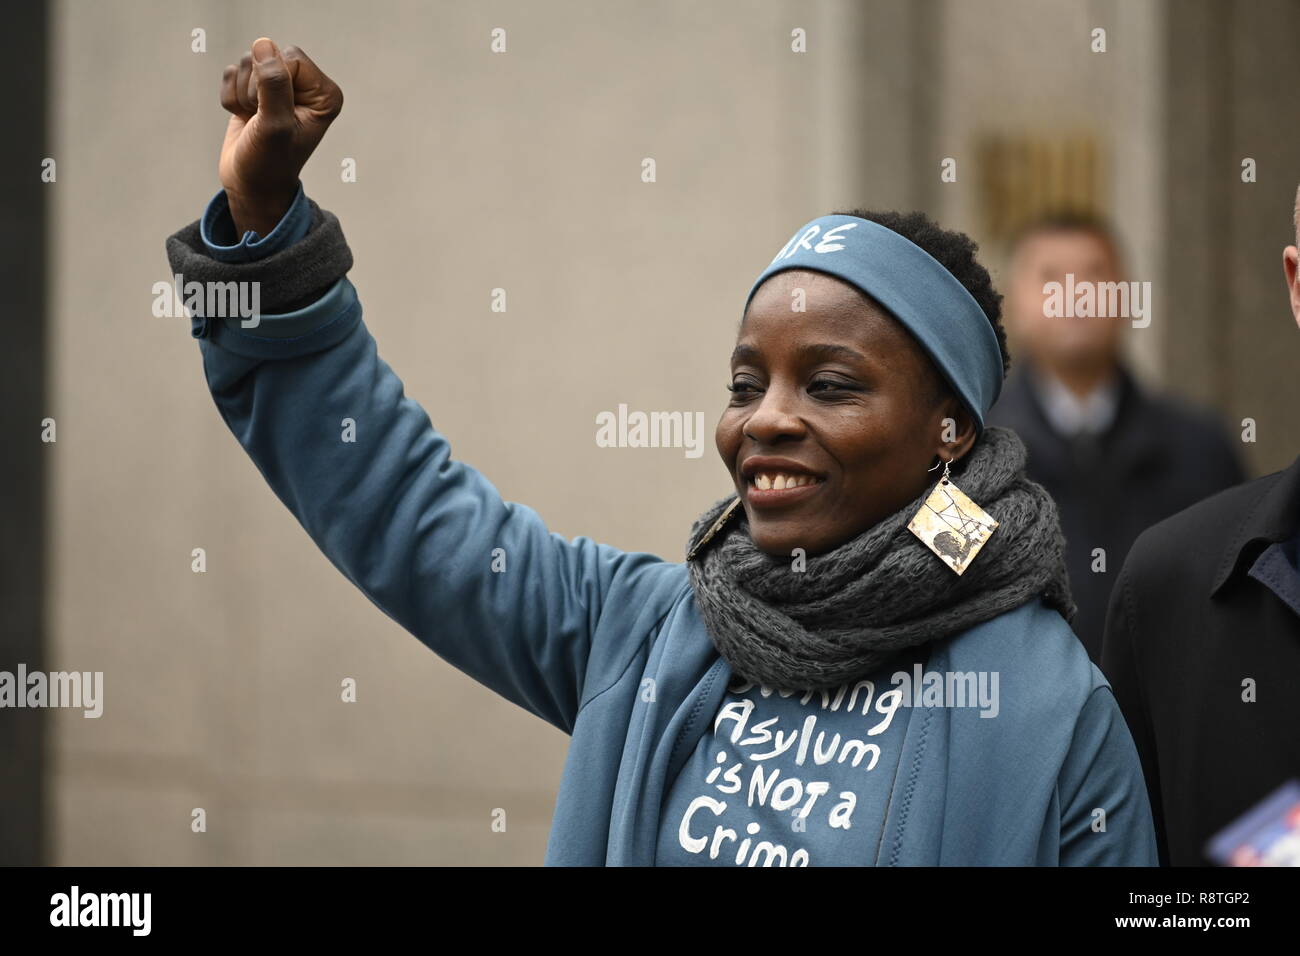 New York, USA. 17th Dec, 2018. New York, U.S., 17 December 2018 Statue of Liberty climber Patricia Okoumou salutes supporters outside federal court following her conviction by a federal magistrate judge on misdemeanor charges of trespassing, disorderly conduct, and interfering with the functioning of government for her act of civil disobedience on July 4. Okoumou climbed the base of the statue to protest against Trump administration immigration policies. She is to be sentenced on March 5, 2019. Credit: Joseph Reid/Alamy Live News Stock Photo